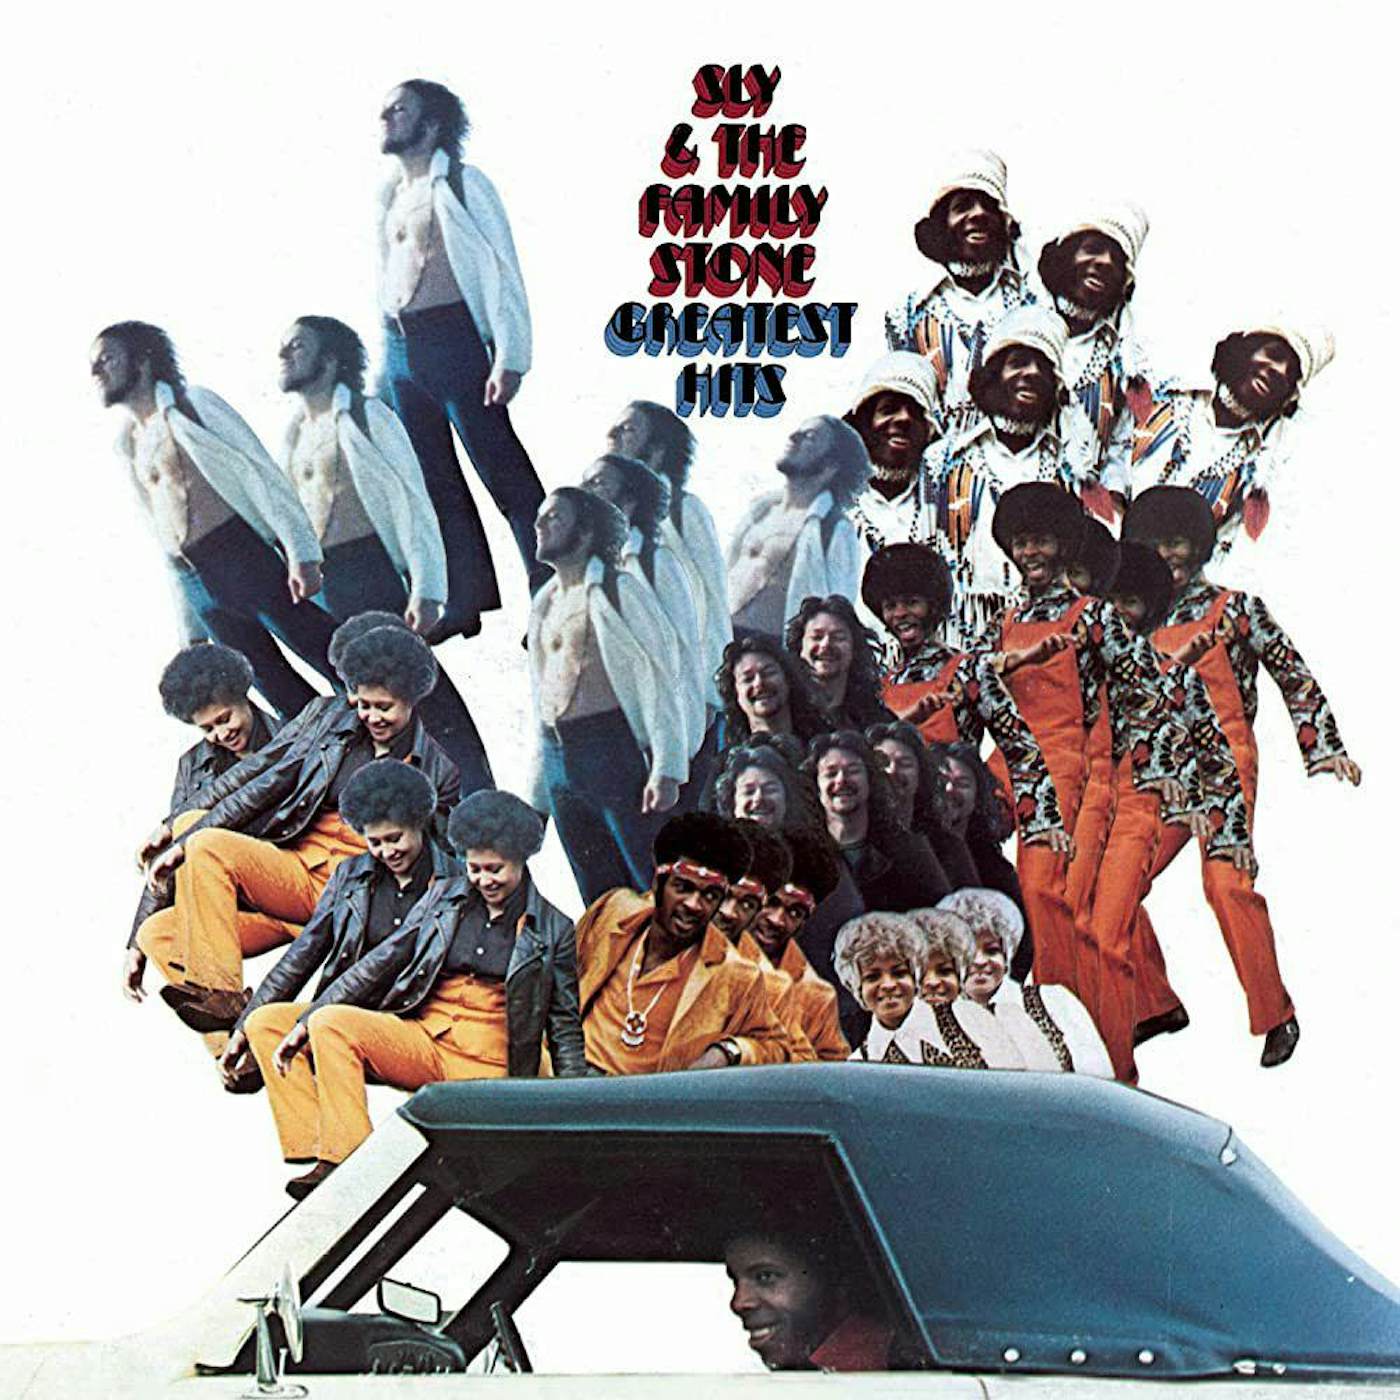 Sly & The Family Stone Greatest Hits (150g/dl Card) Vinyl Record